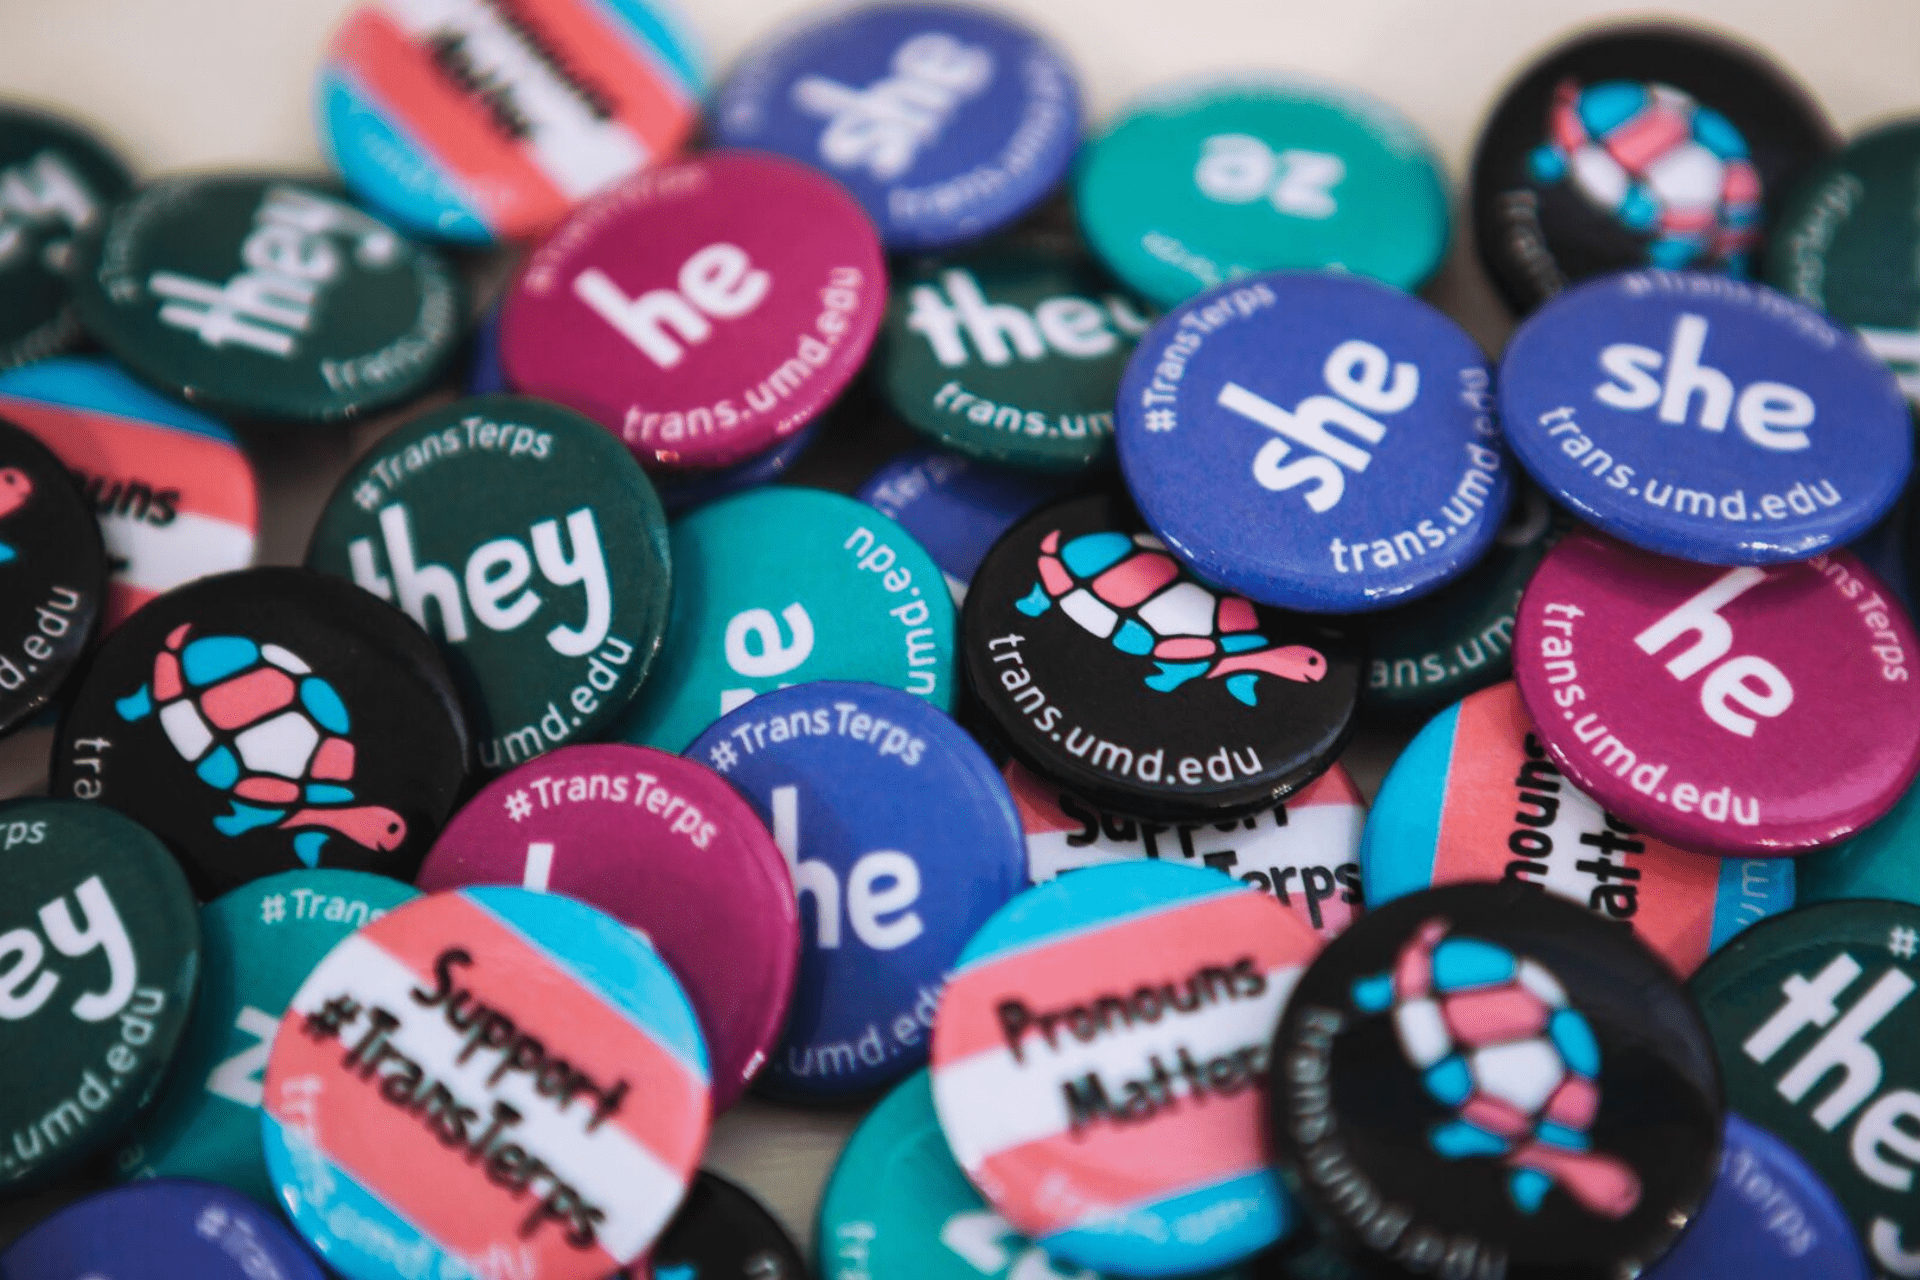 A pile of buttons in support of proper pronoun usage distributed by the Lesbian, Gay, Bisexual, and Transgender Equity Center